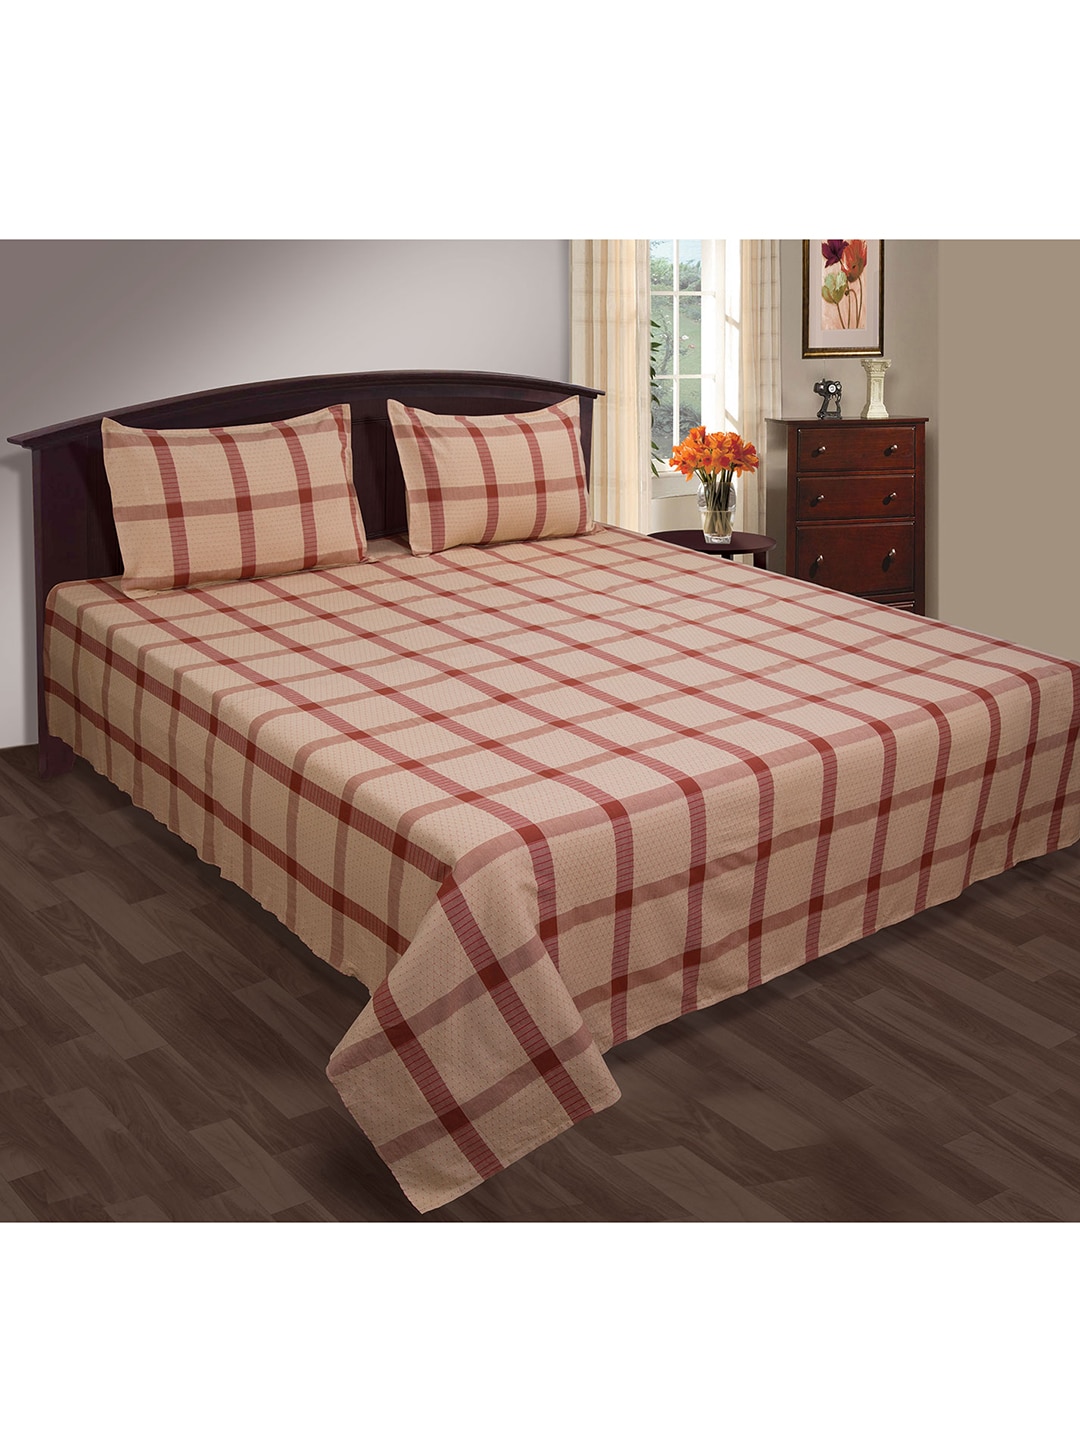 SHADES of LIFE Beige & Red Checked Double Queen Pure Cotton Handloom Bedcover With 2 Pillow Cover Price in India